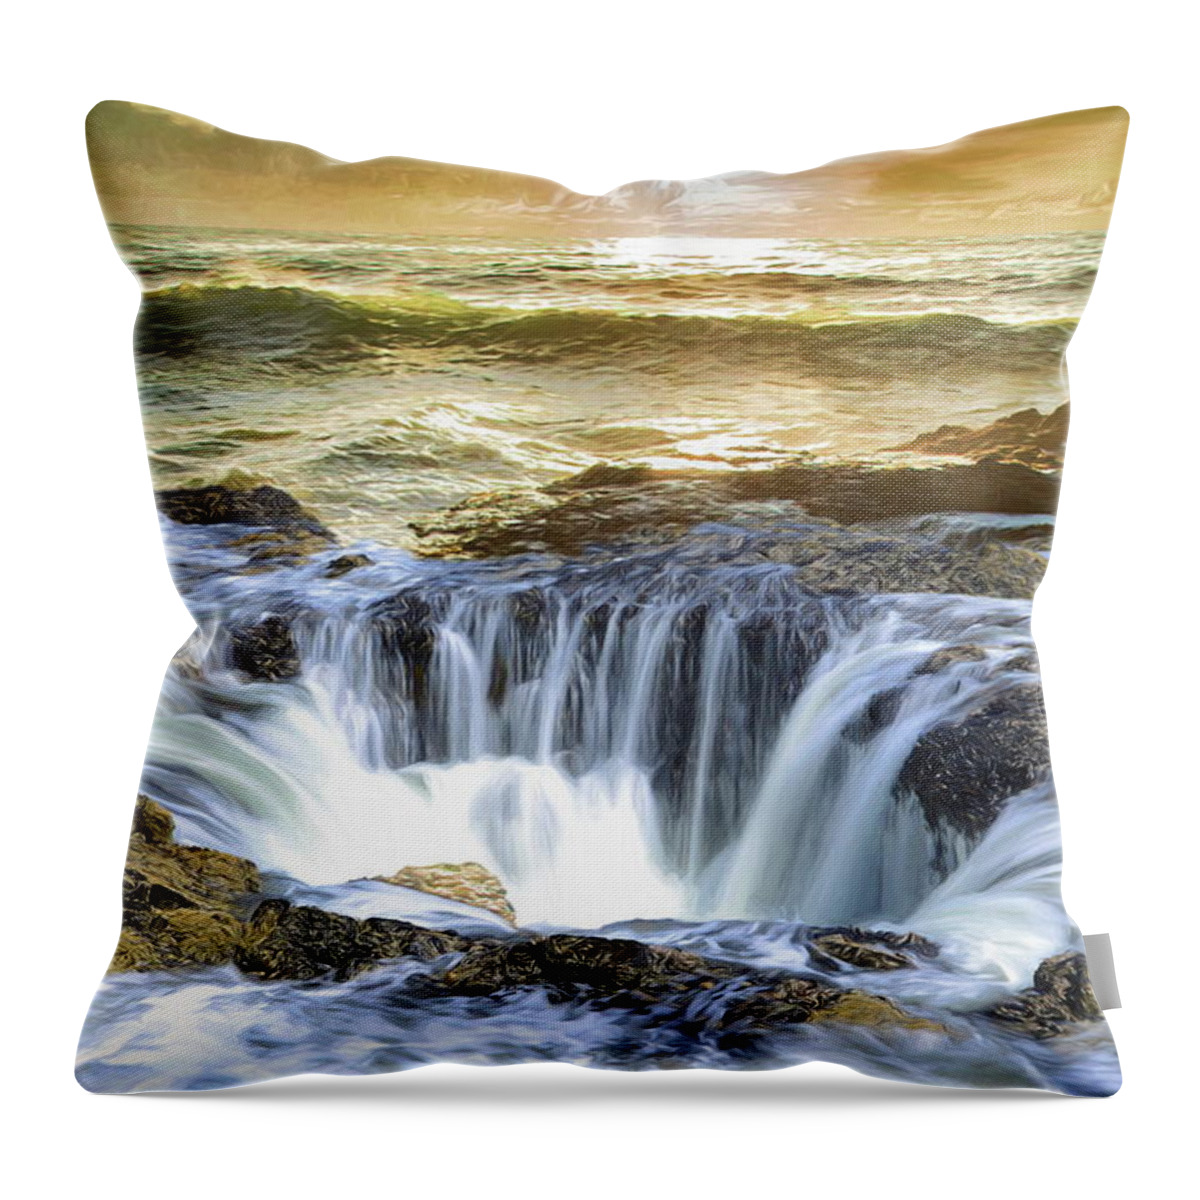 Thor's Well Throw Pillow featuring the digital art Thor's Well - Oregon Coast by Russ Harris